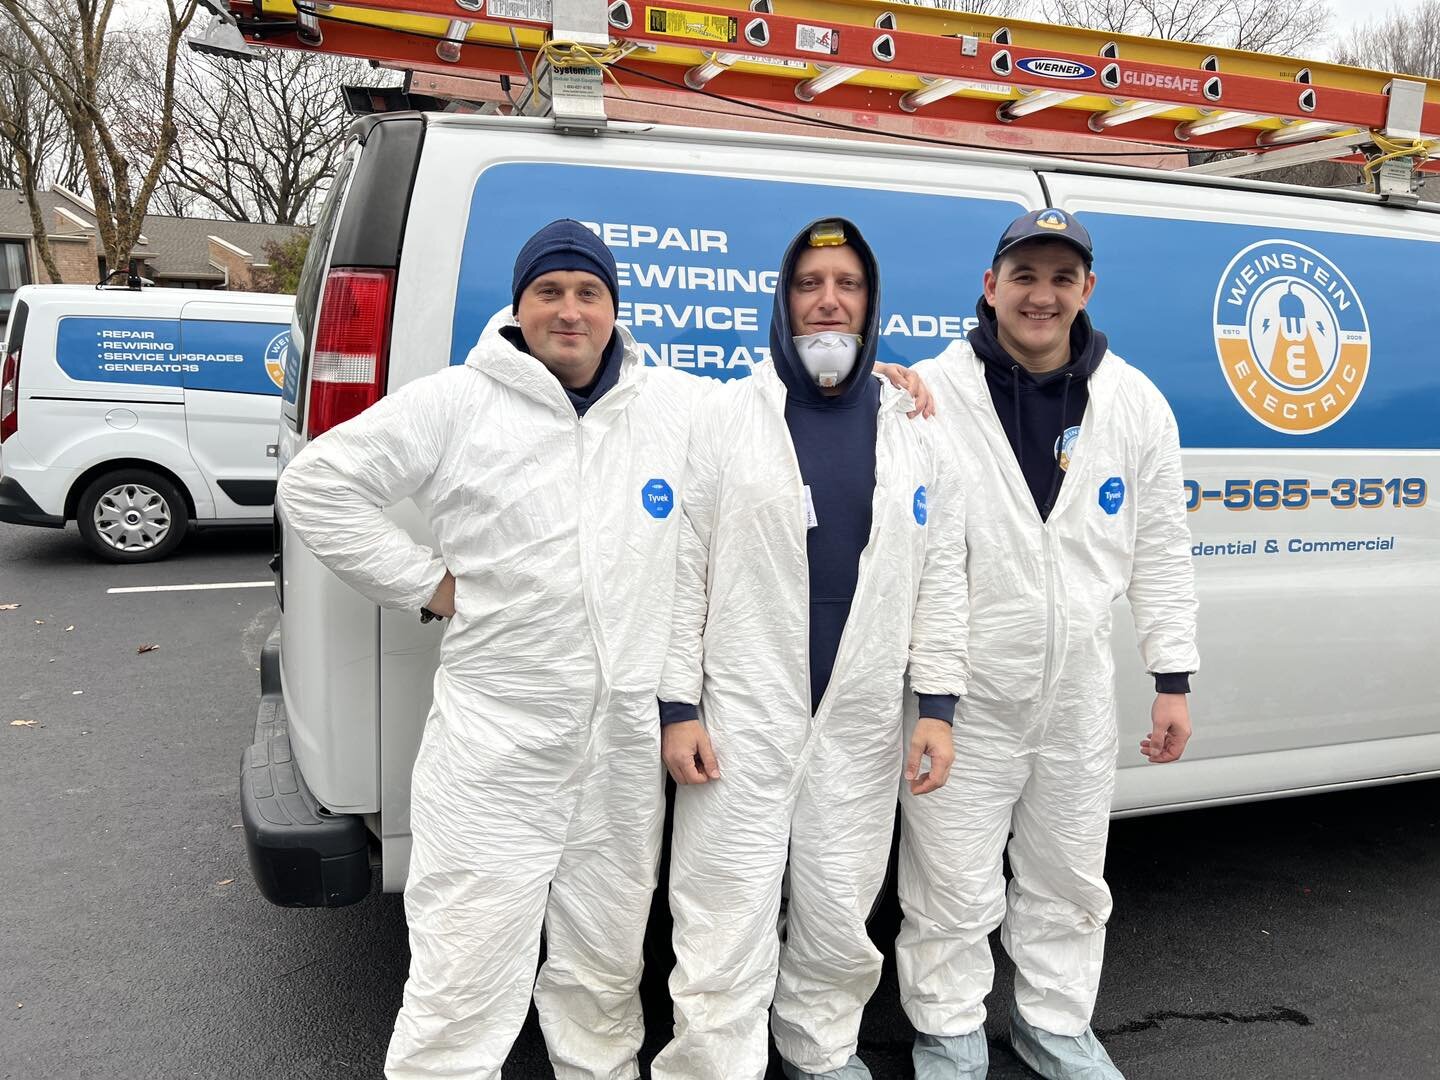 How do we look in our attic spacesuits?! 

Hooked up bath fans in the attics of Hickory Hill Condos in Media today. 

#suitedanbooted #sparkylife #phillysfinest #mediapa